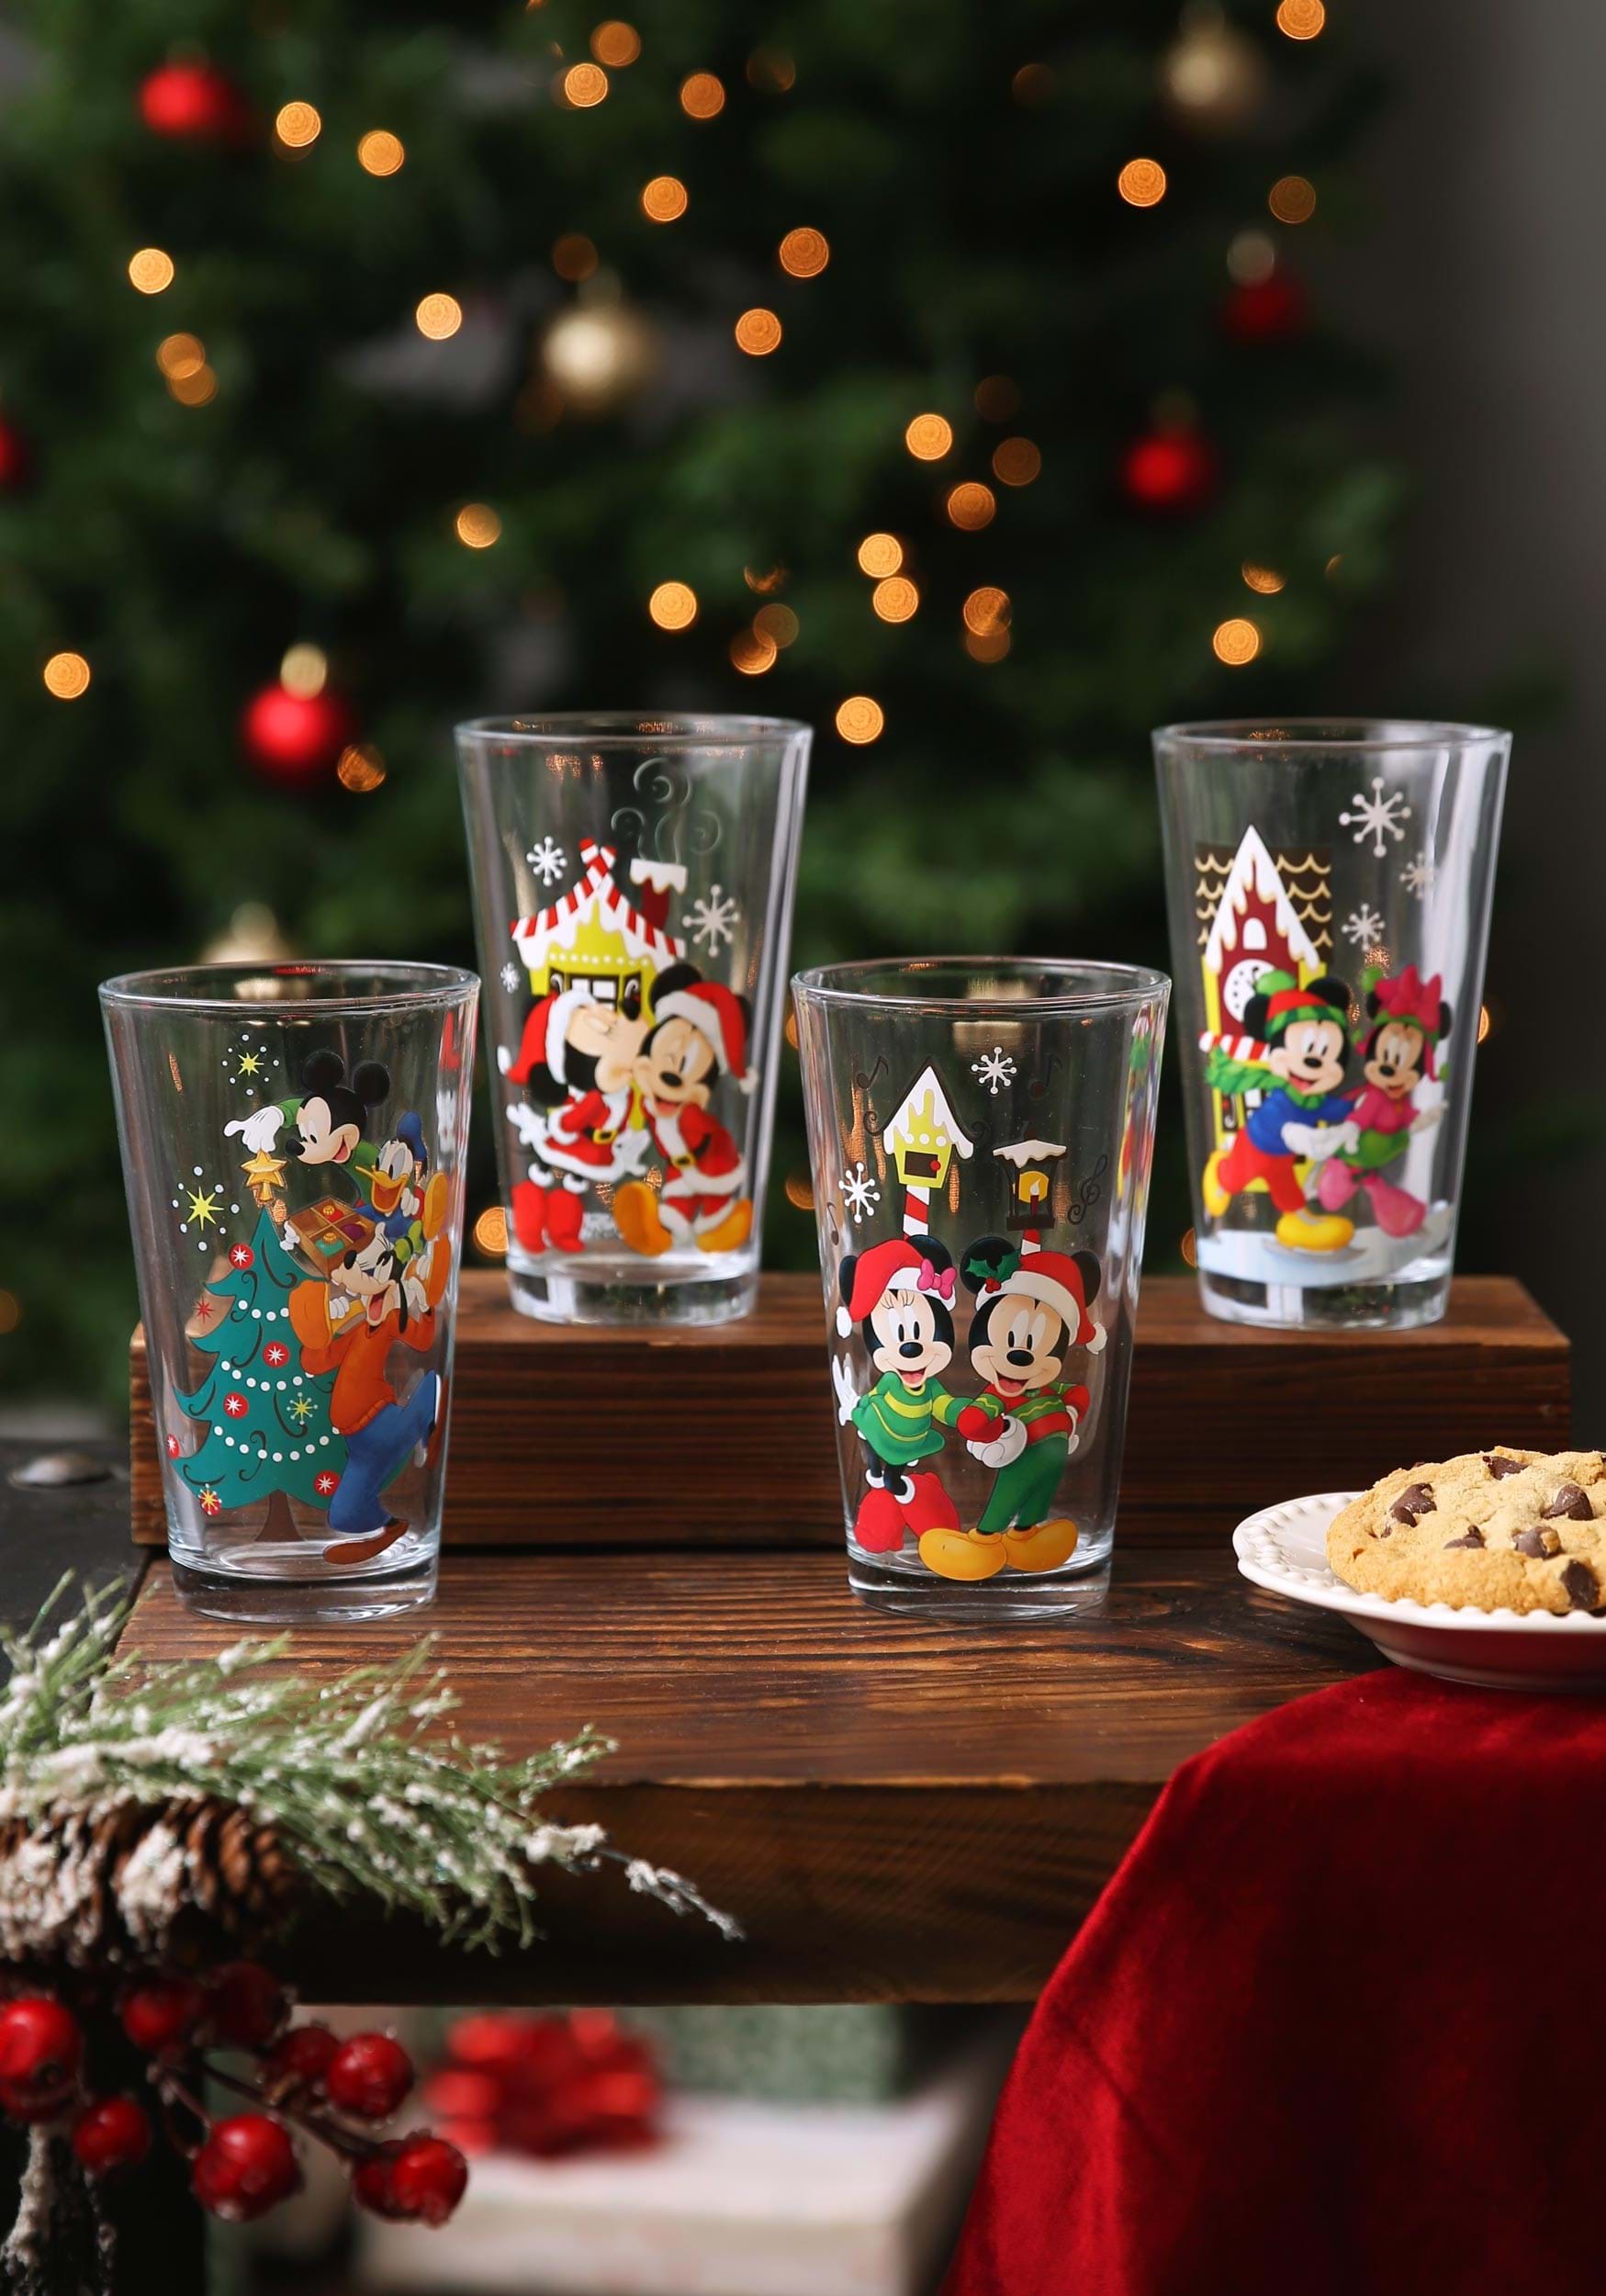 https://images.fun.com/products/67849/1-1/disney-mickey-minnie-holiday-16-oz-glasses---se-update.jpg